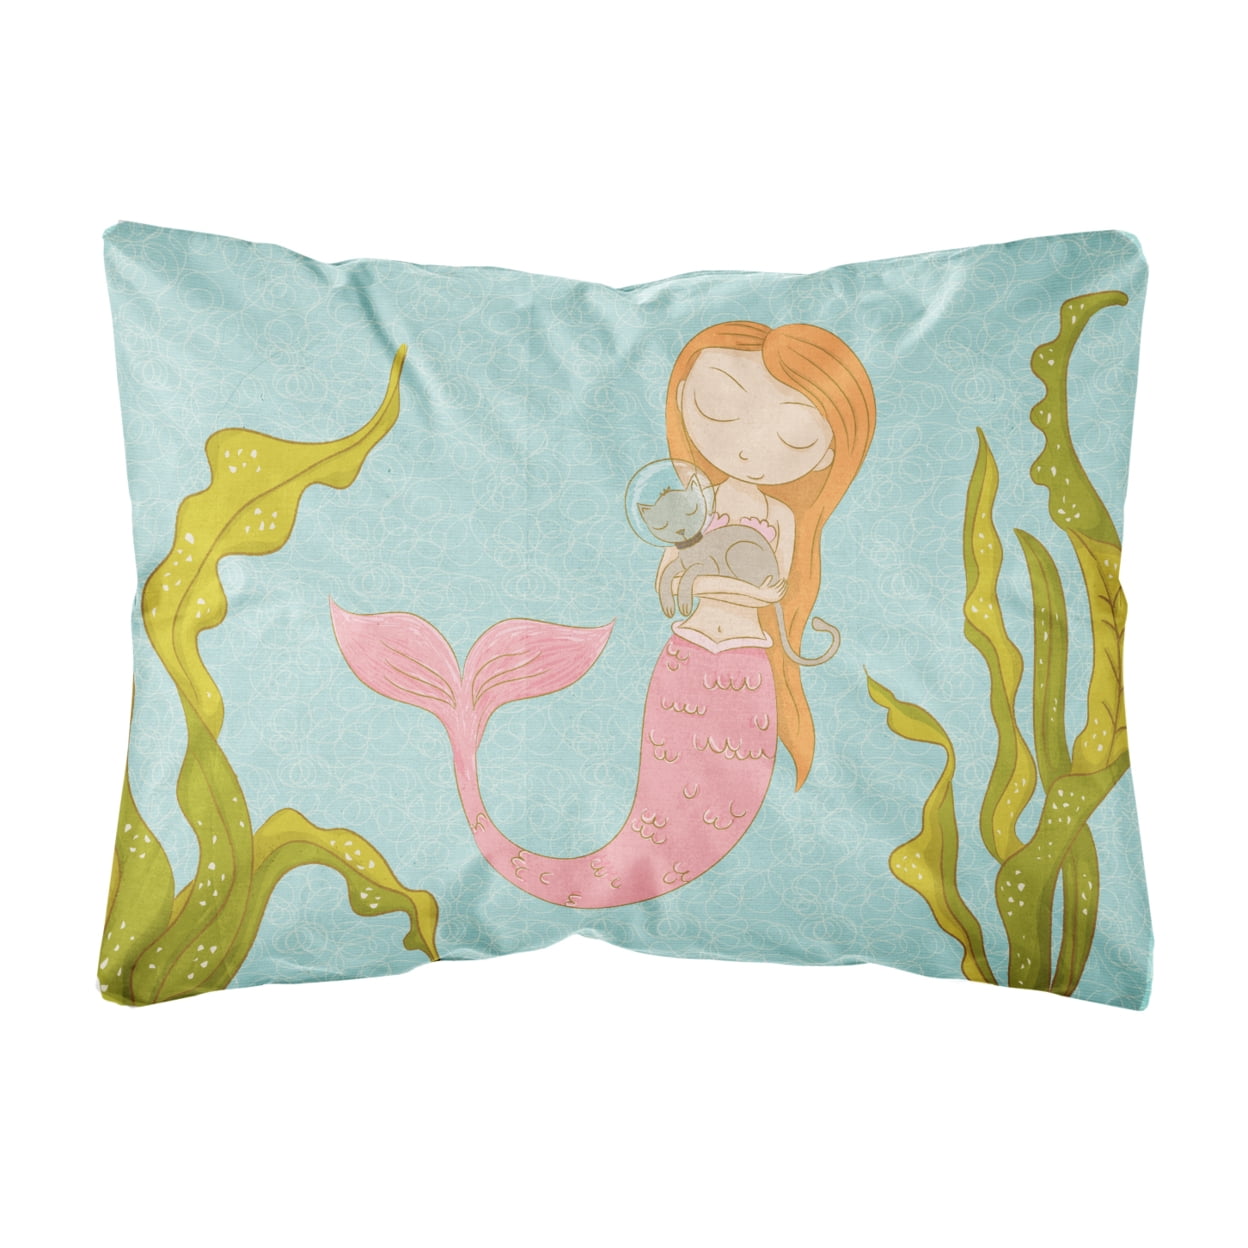 JensenDistributionServices Mermaid and Cat Underwater Canvas Fabric Decorative Pillow